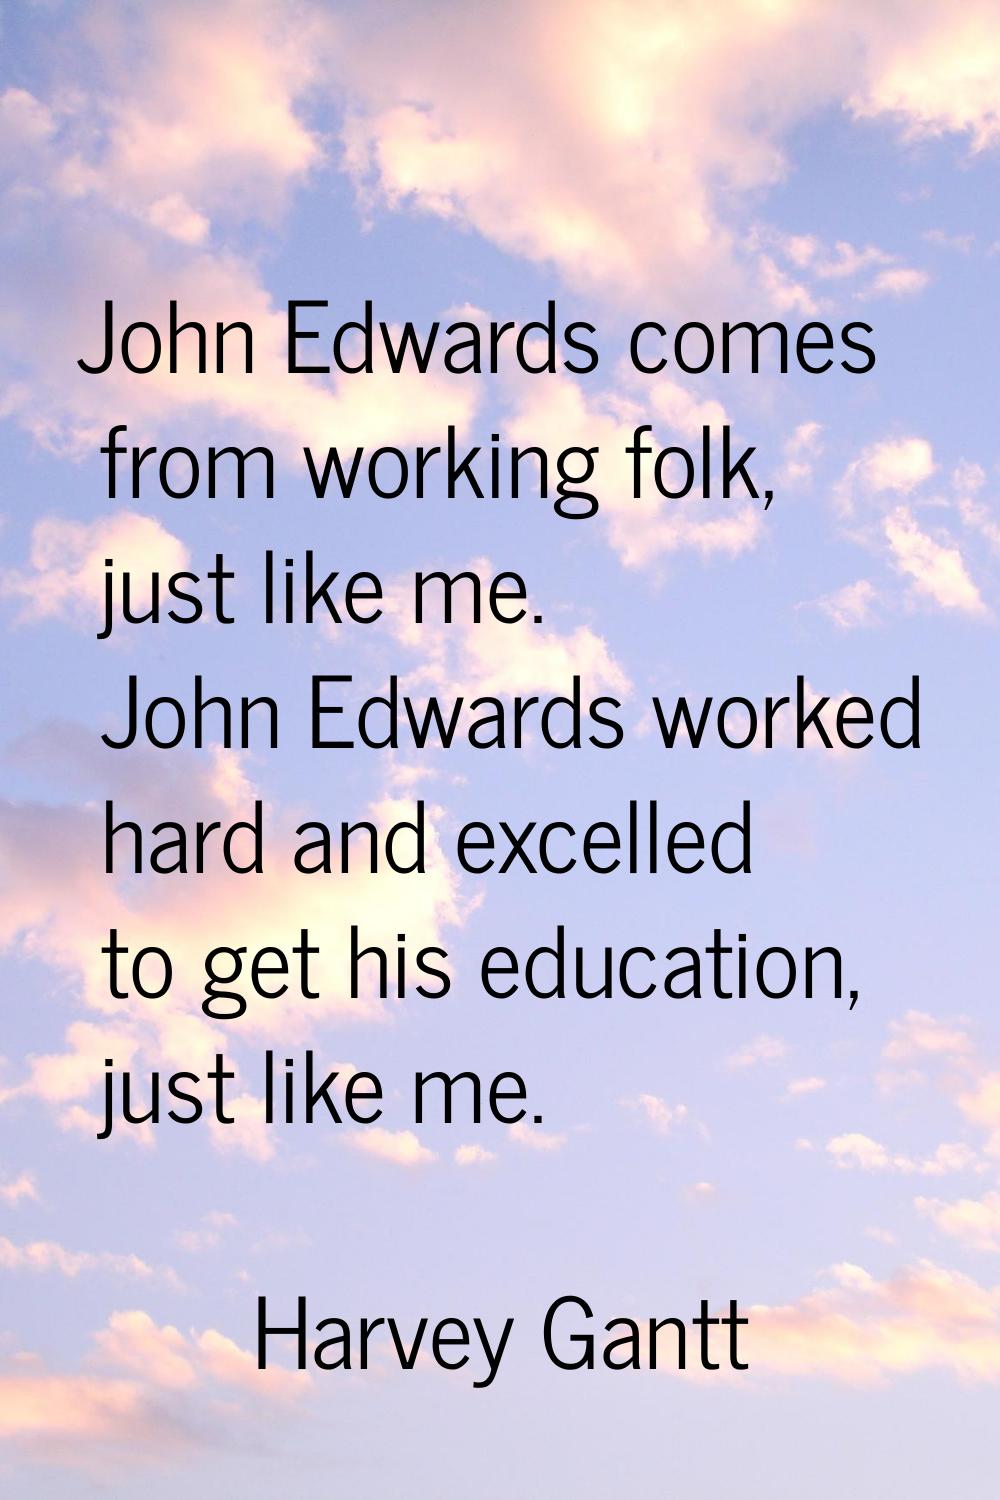 John Edwards comes from working folk, just like me. John Edwards worked hard and excelled to get hi